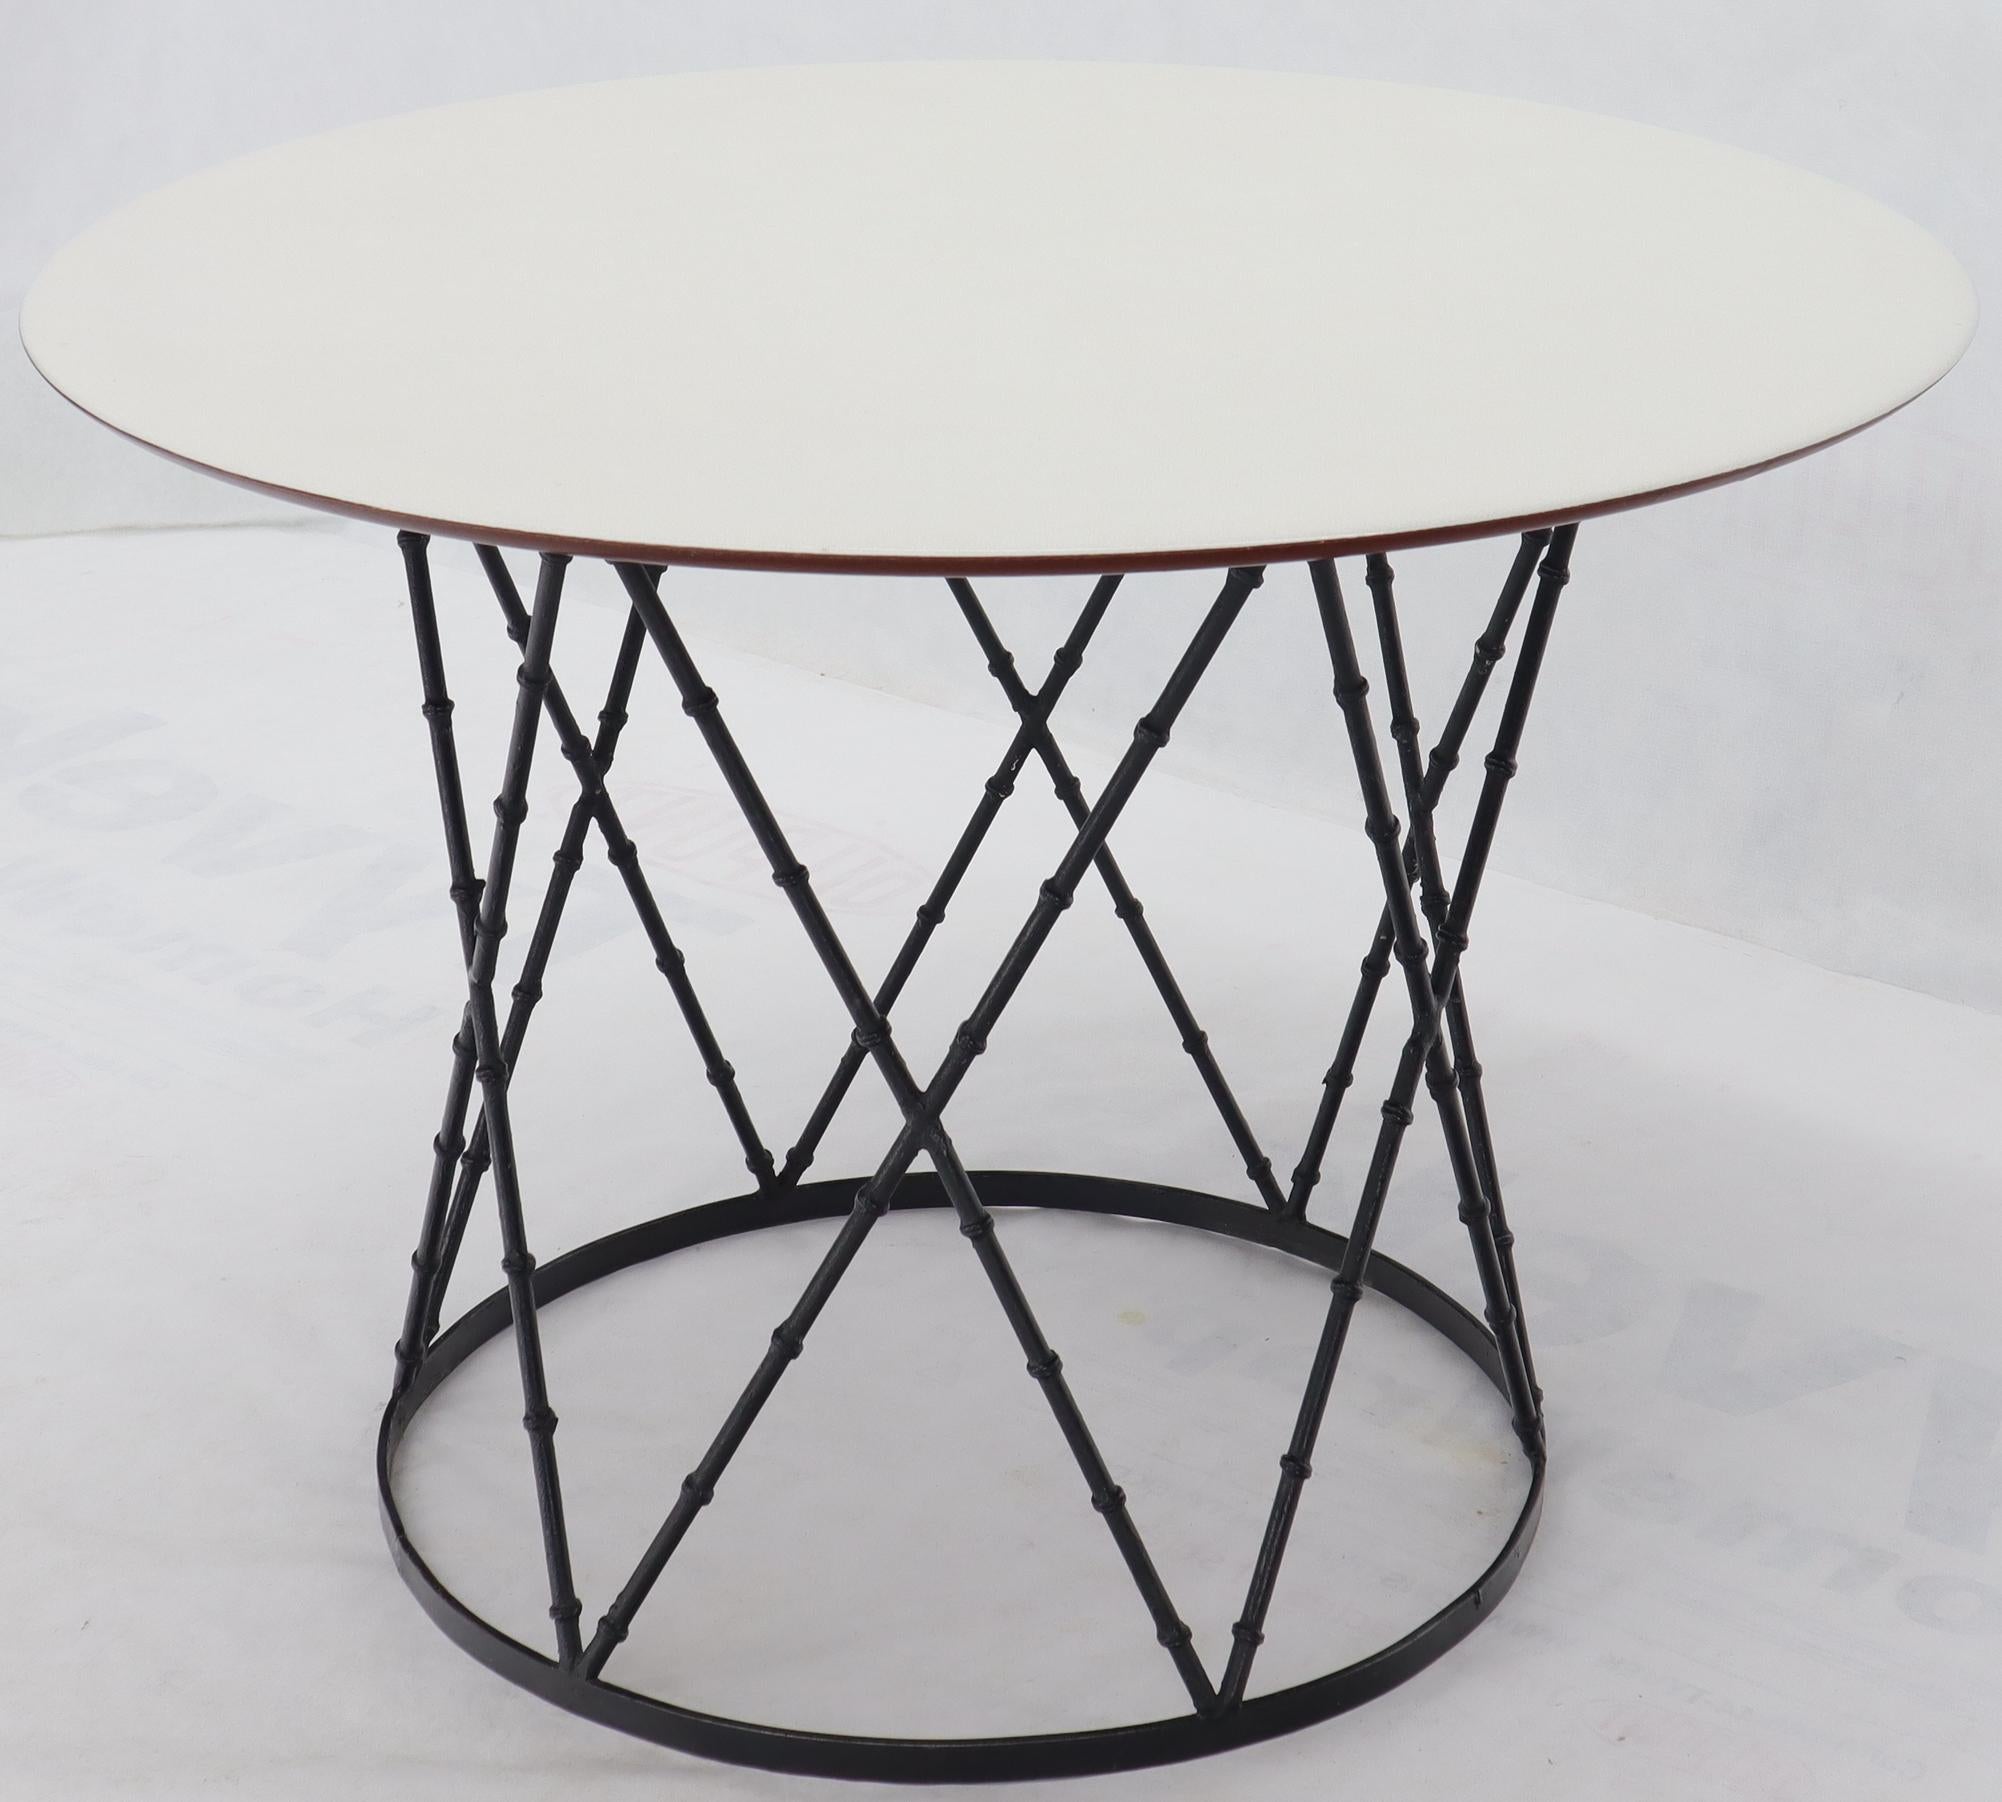 20th Century Enameled Top Faux Bamboo Base Mid-Century Modern Dining Dinette Table For Sale